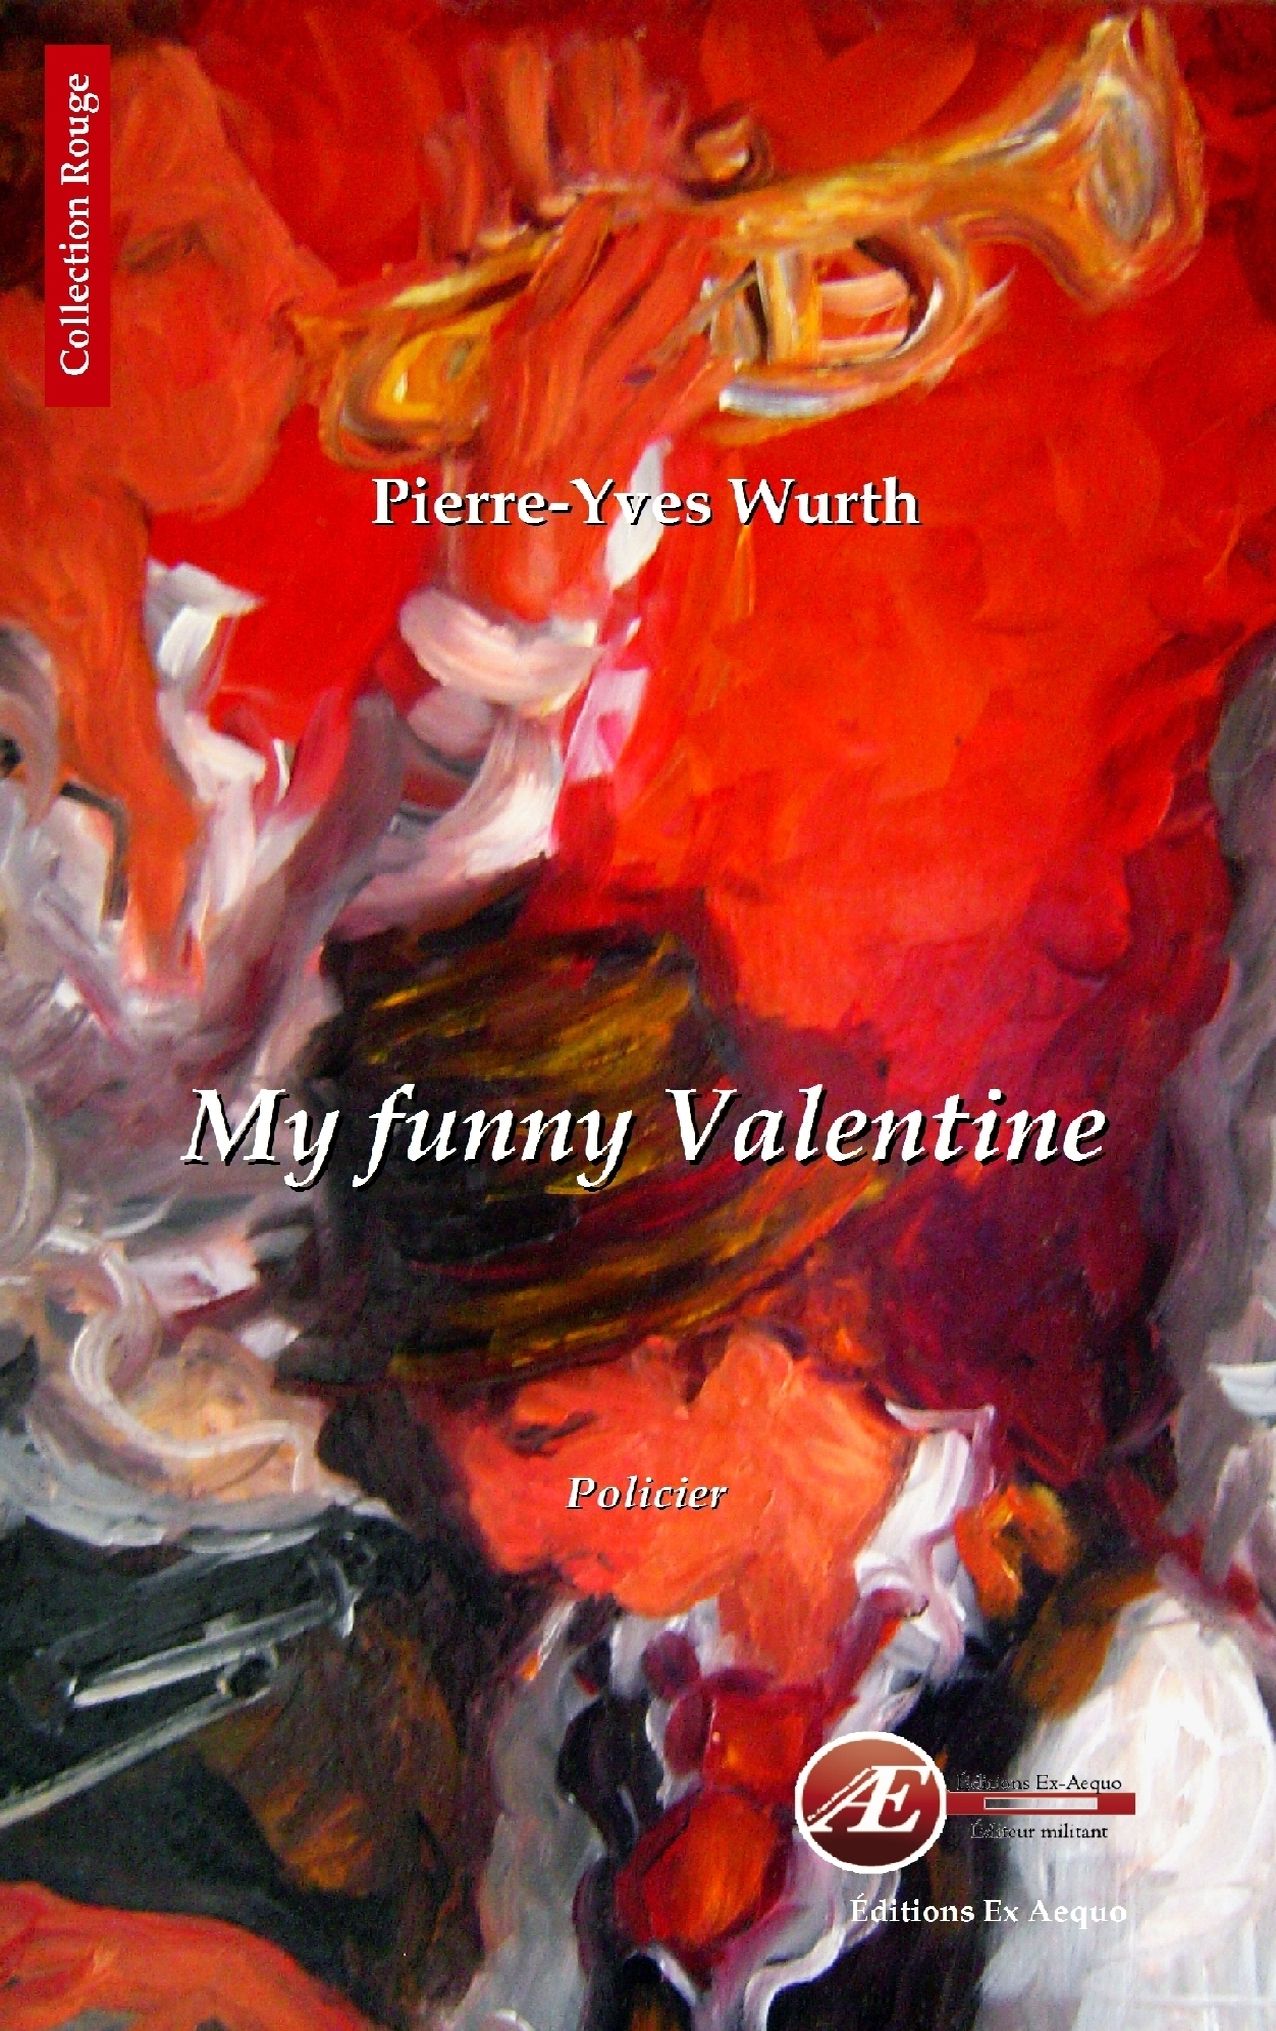 You are currently viewing My funny Valentine, de Pierre-Yves Wurth